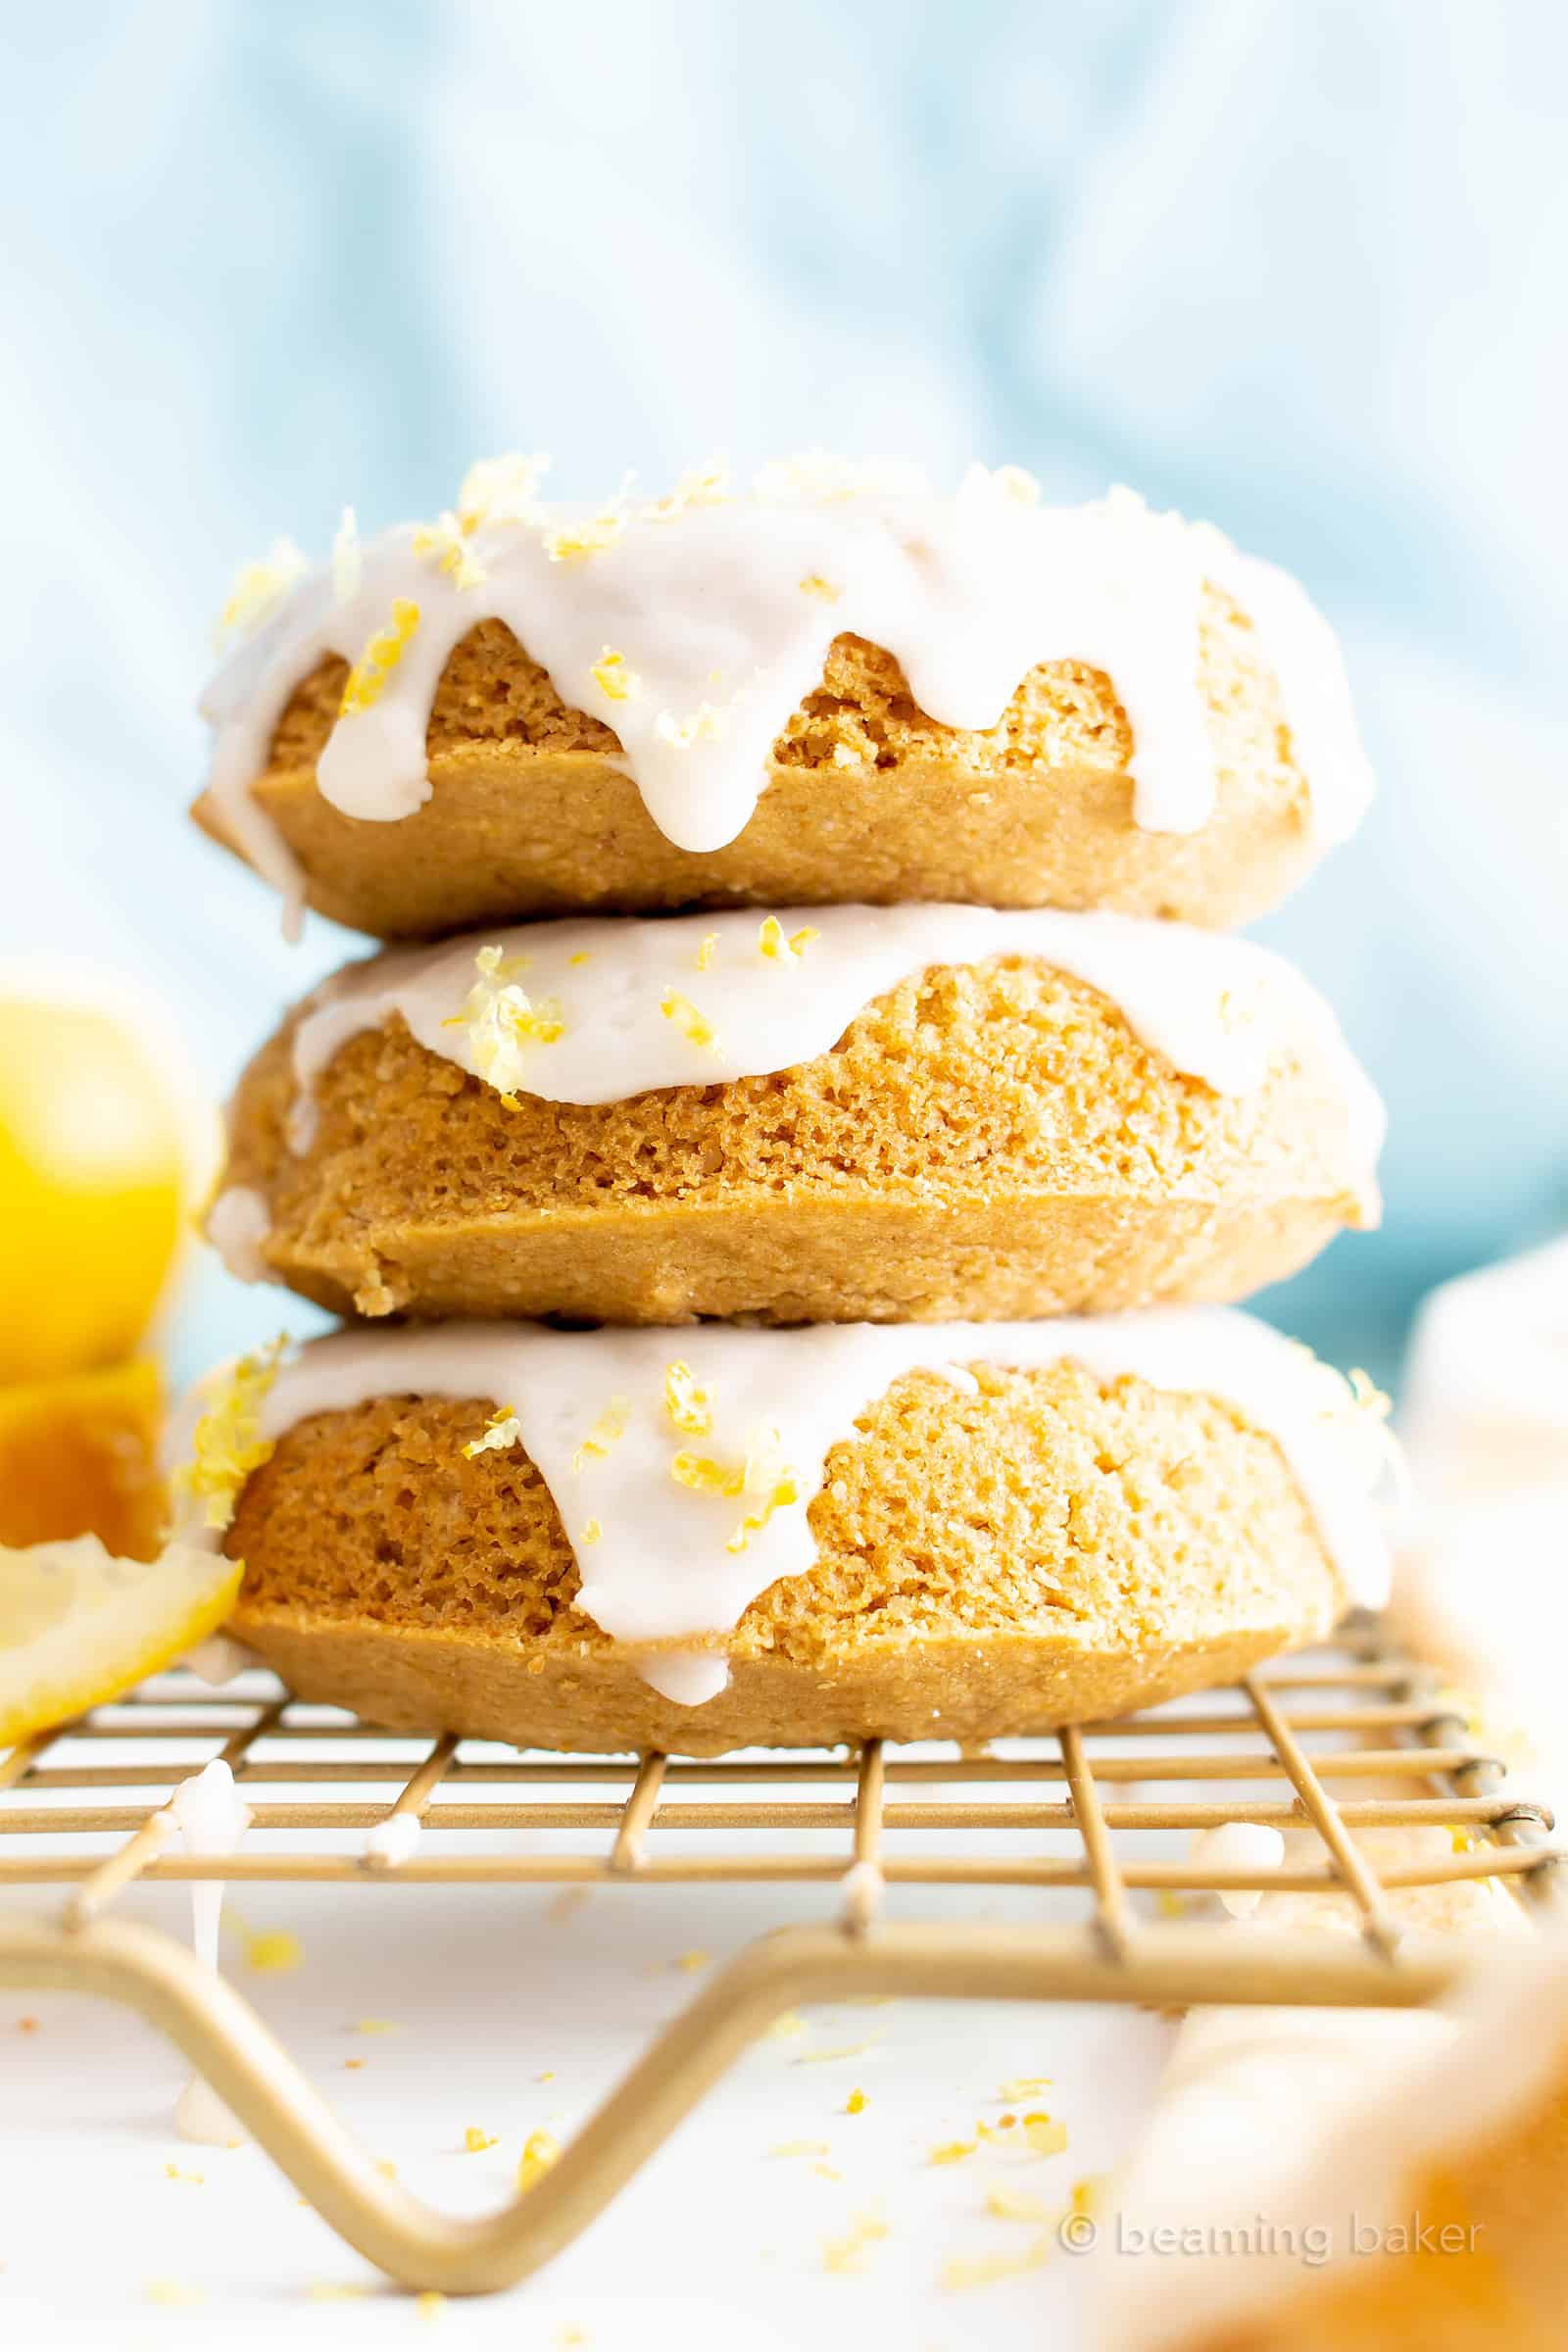 Vegan Soft Baked Lemon Donuts with Lemon Glaze (GF): this vegan gluten free donuts recipe yields soft and fluffy donuts with easy homemade lemon glaze! Healthy Doughnuts, Dairy-Free, Refined Sugar-Free. #Vegan #Donuts #Lemon #GlutenFree #DairyFree | Recipe at BeamingBaker.com